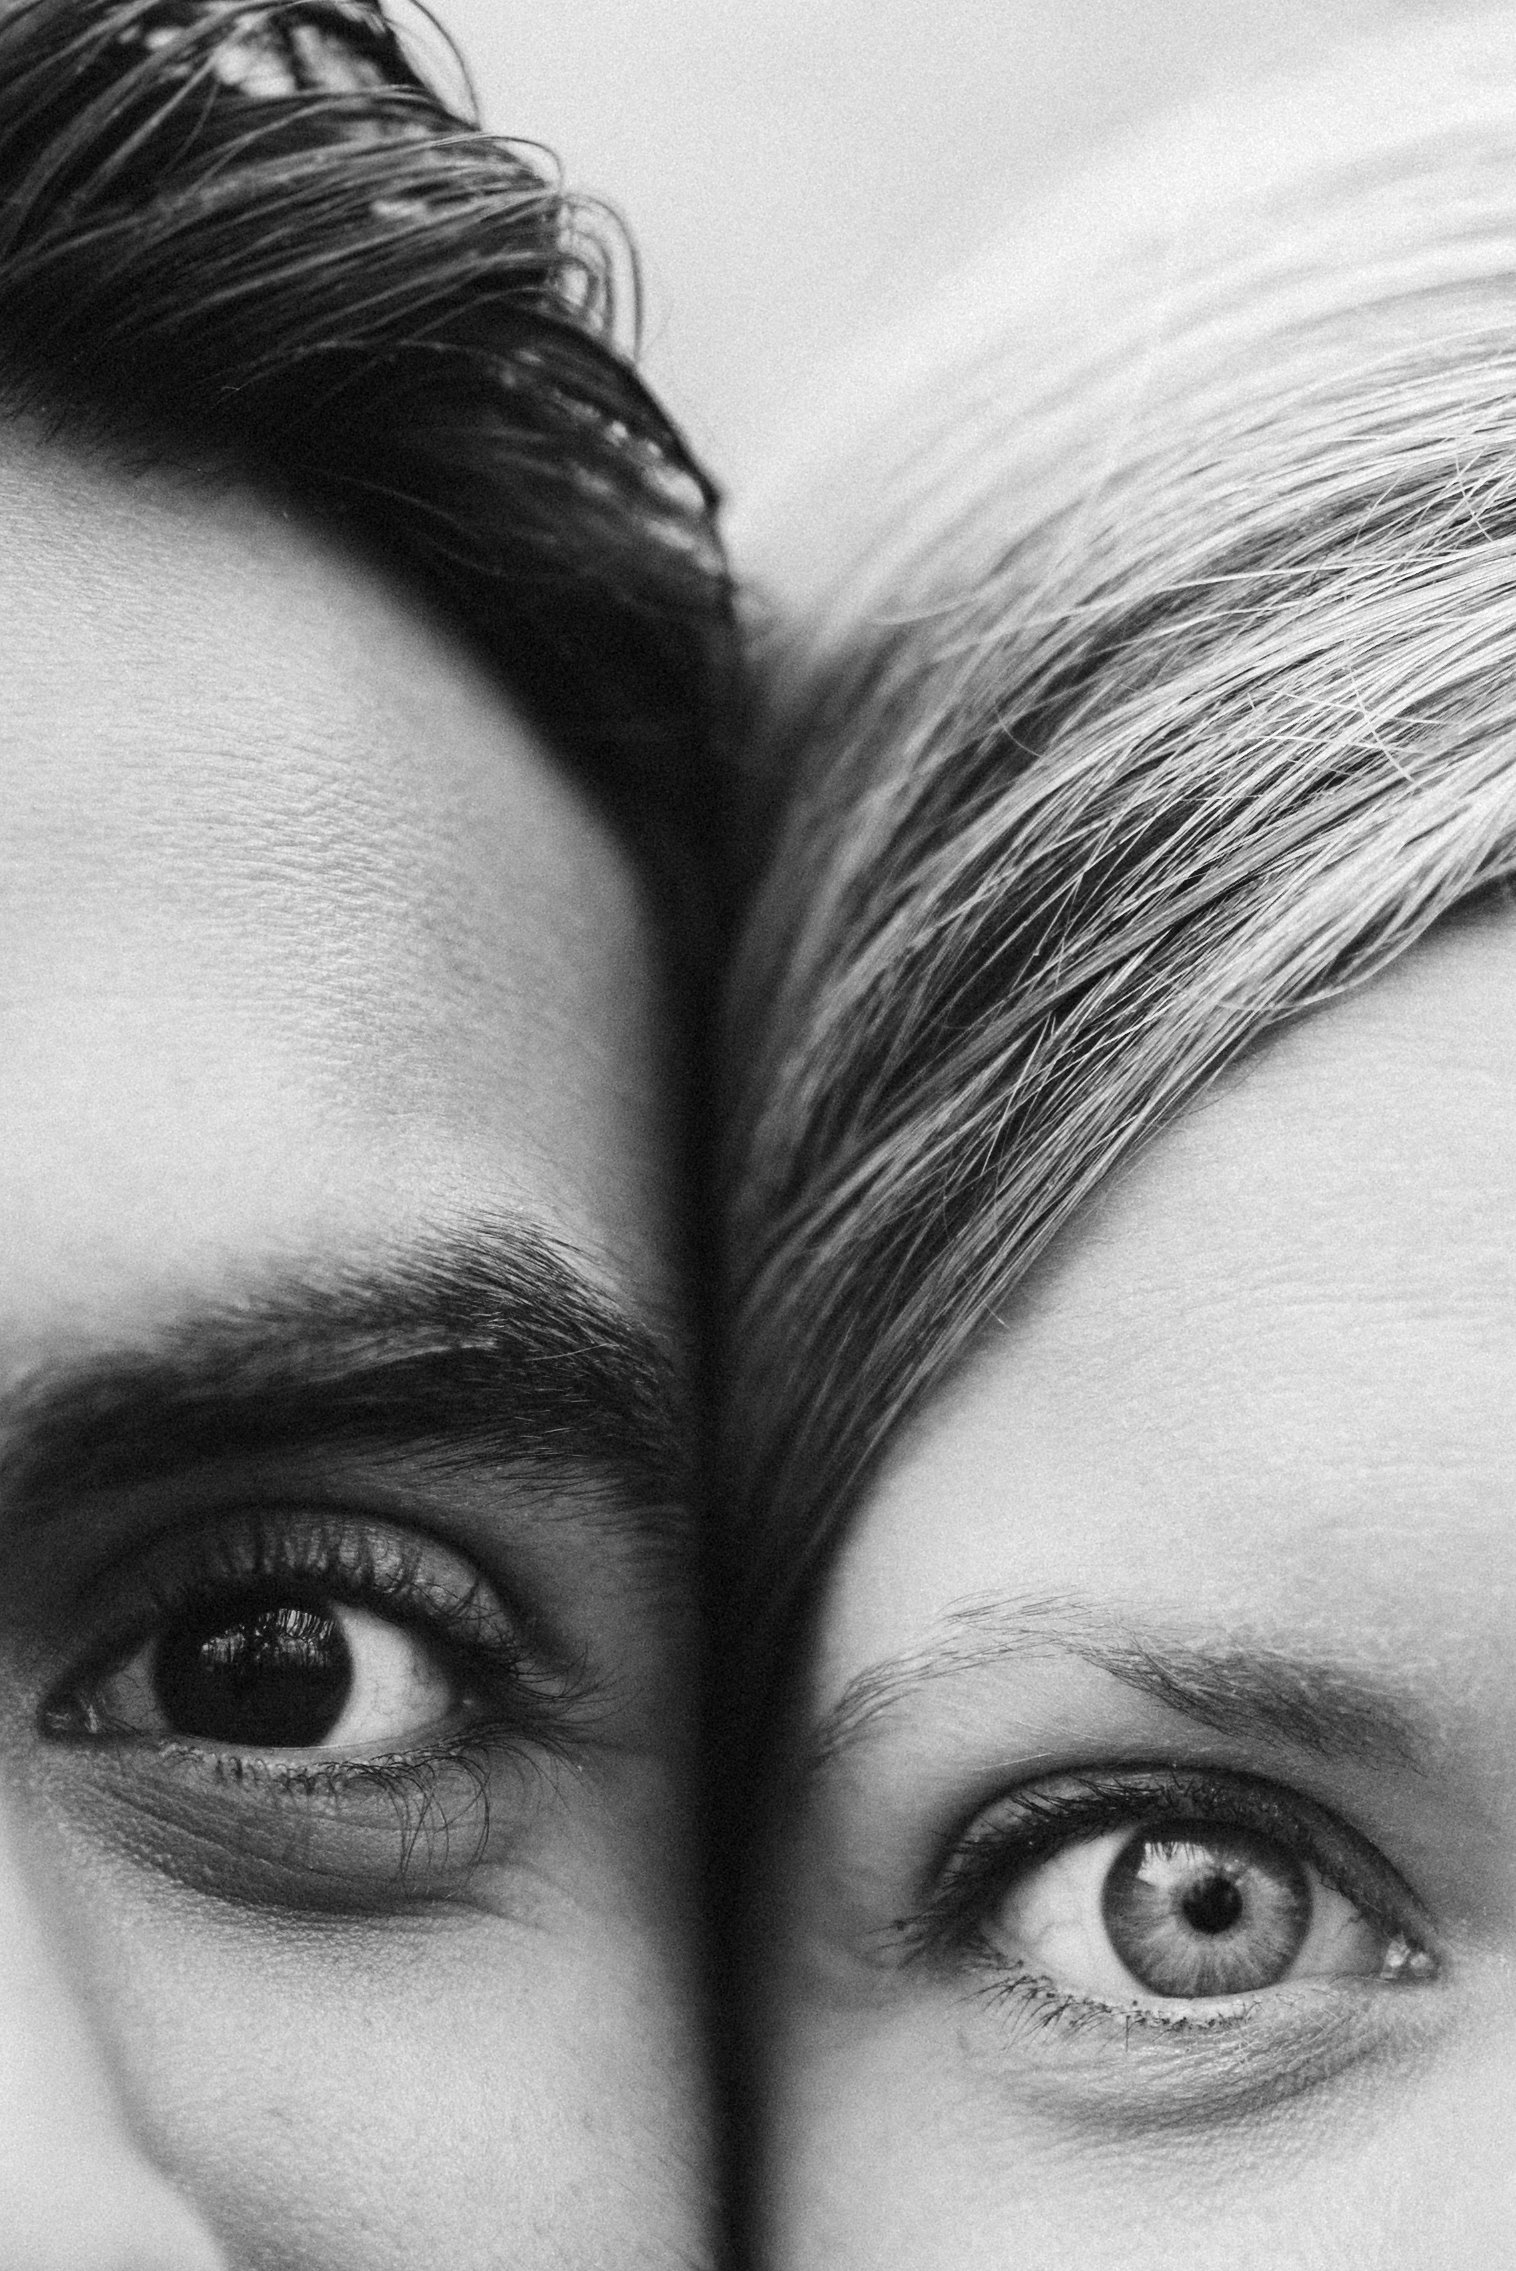 Engagement Photos, Rainy, Ellicott City, Maryland Wedding Photographer, Winter, Overhills Mansion, Indian American, Historical, Classic, Bride and Groom, Close Up Photo, Black and White Photo